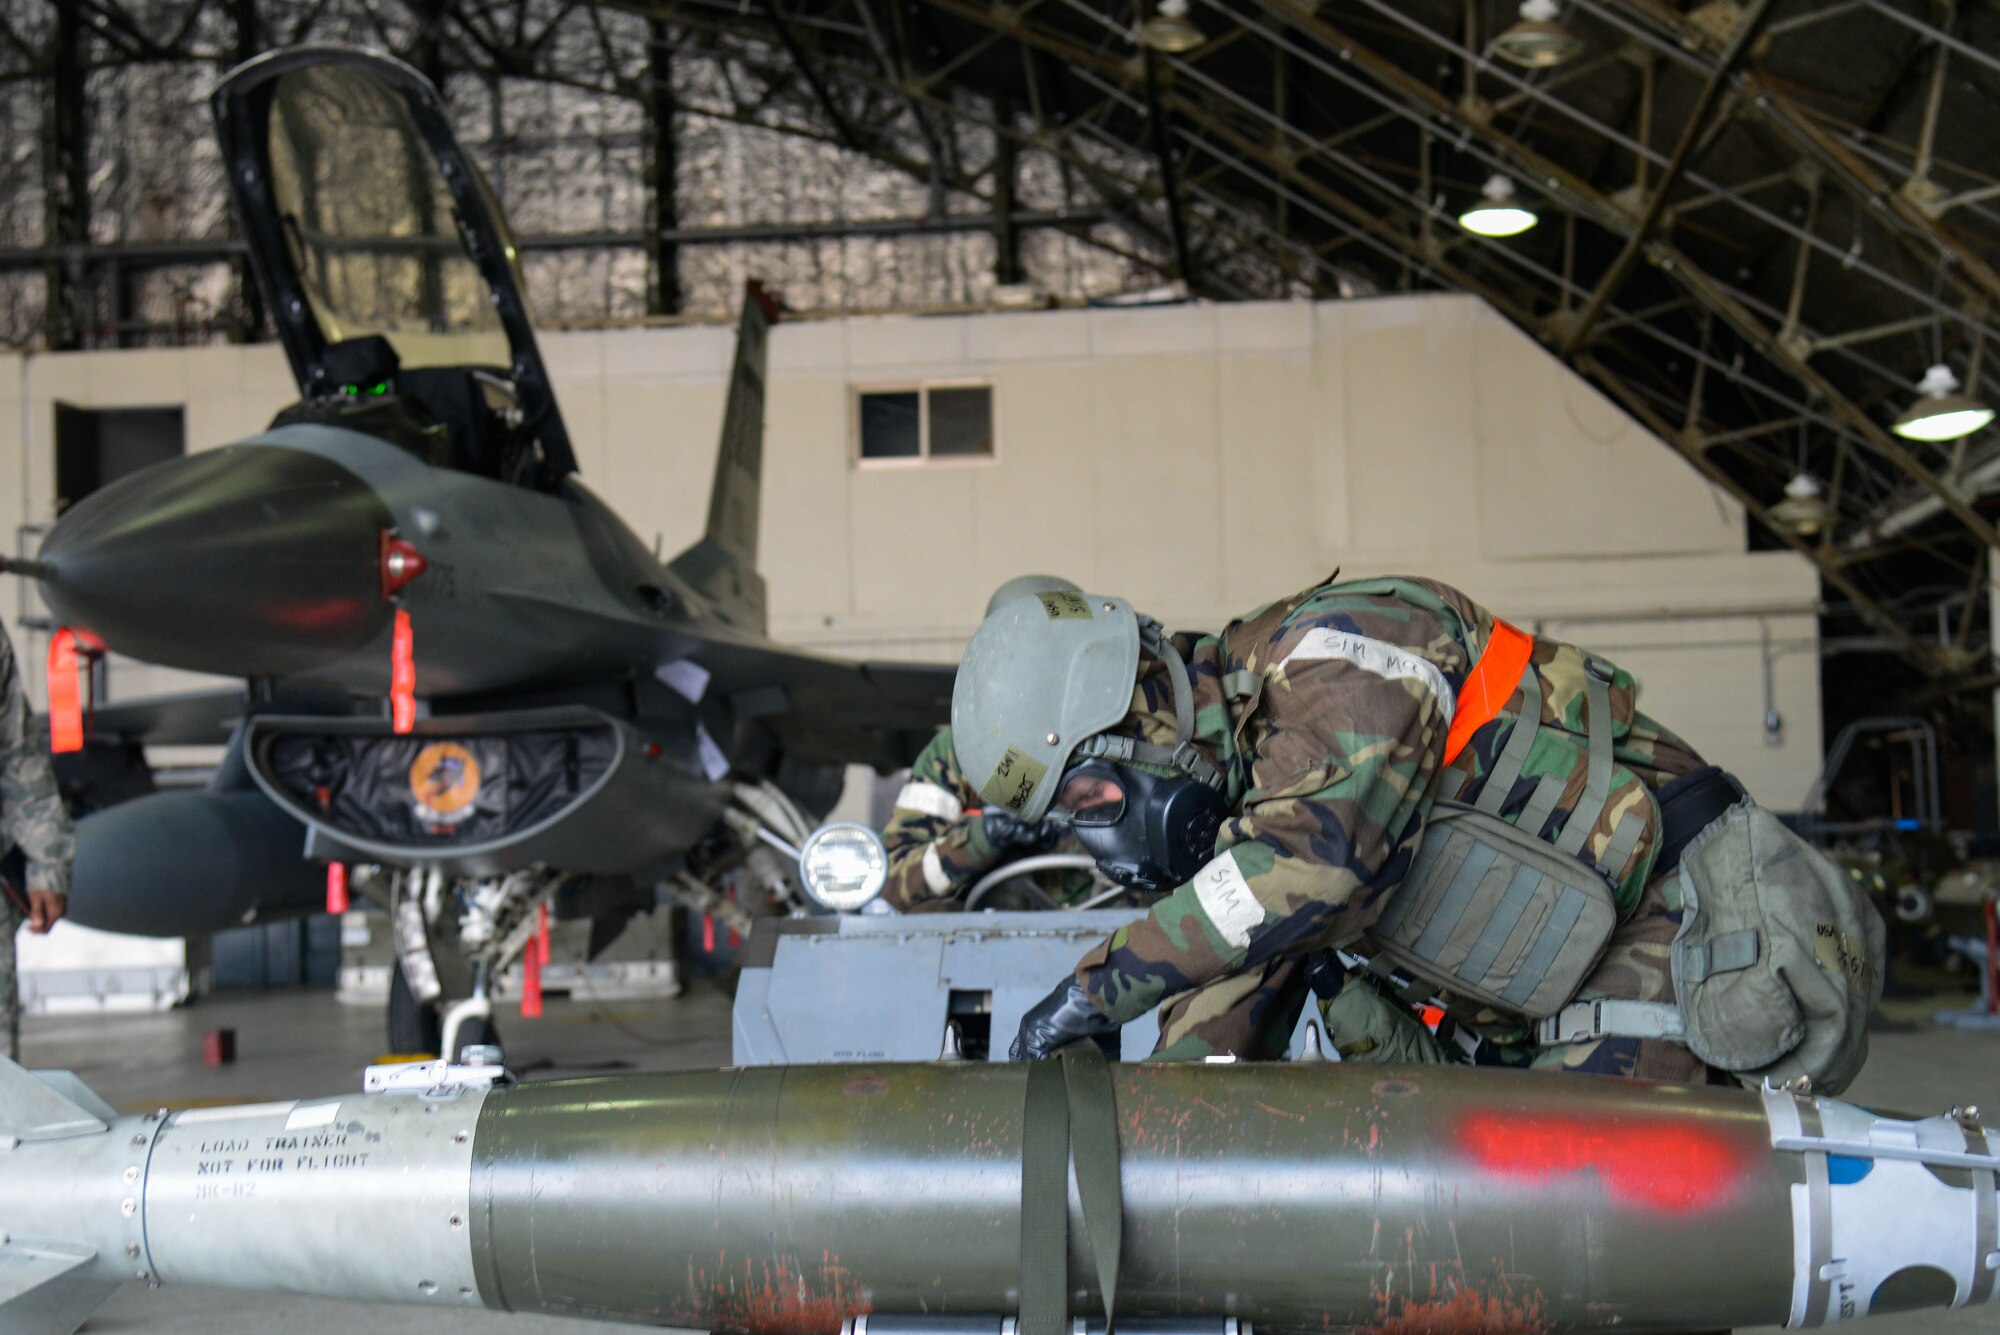 Staff Sgt. Robert Olsen, 36th Aircraft Maintenance Unit, prepares a Mark 82 training bomb to load onto an F-16 Fighting Falcon during a quarterly weapons load competition April 8, 2016, at Osan Air Base, Republic of Korea. Weapons load teams from the 25th and 36th AMUs competed by loading three training bombs and one missile onto their respective aircraft during the event.  (U.S. Air Force photo by Senior Airman Dillian Bamman/Released)